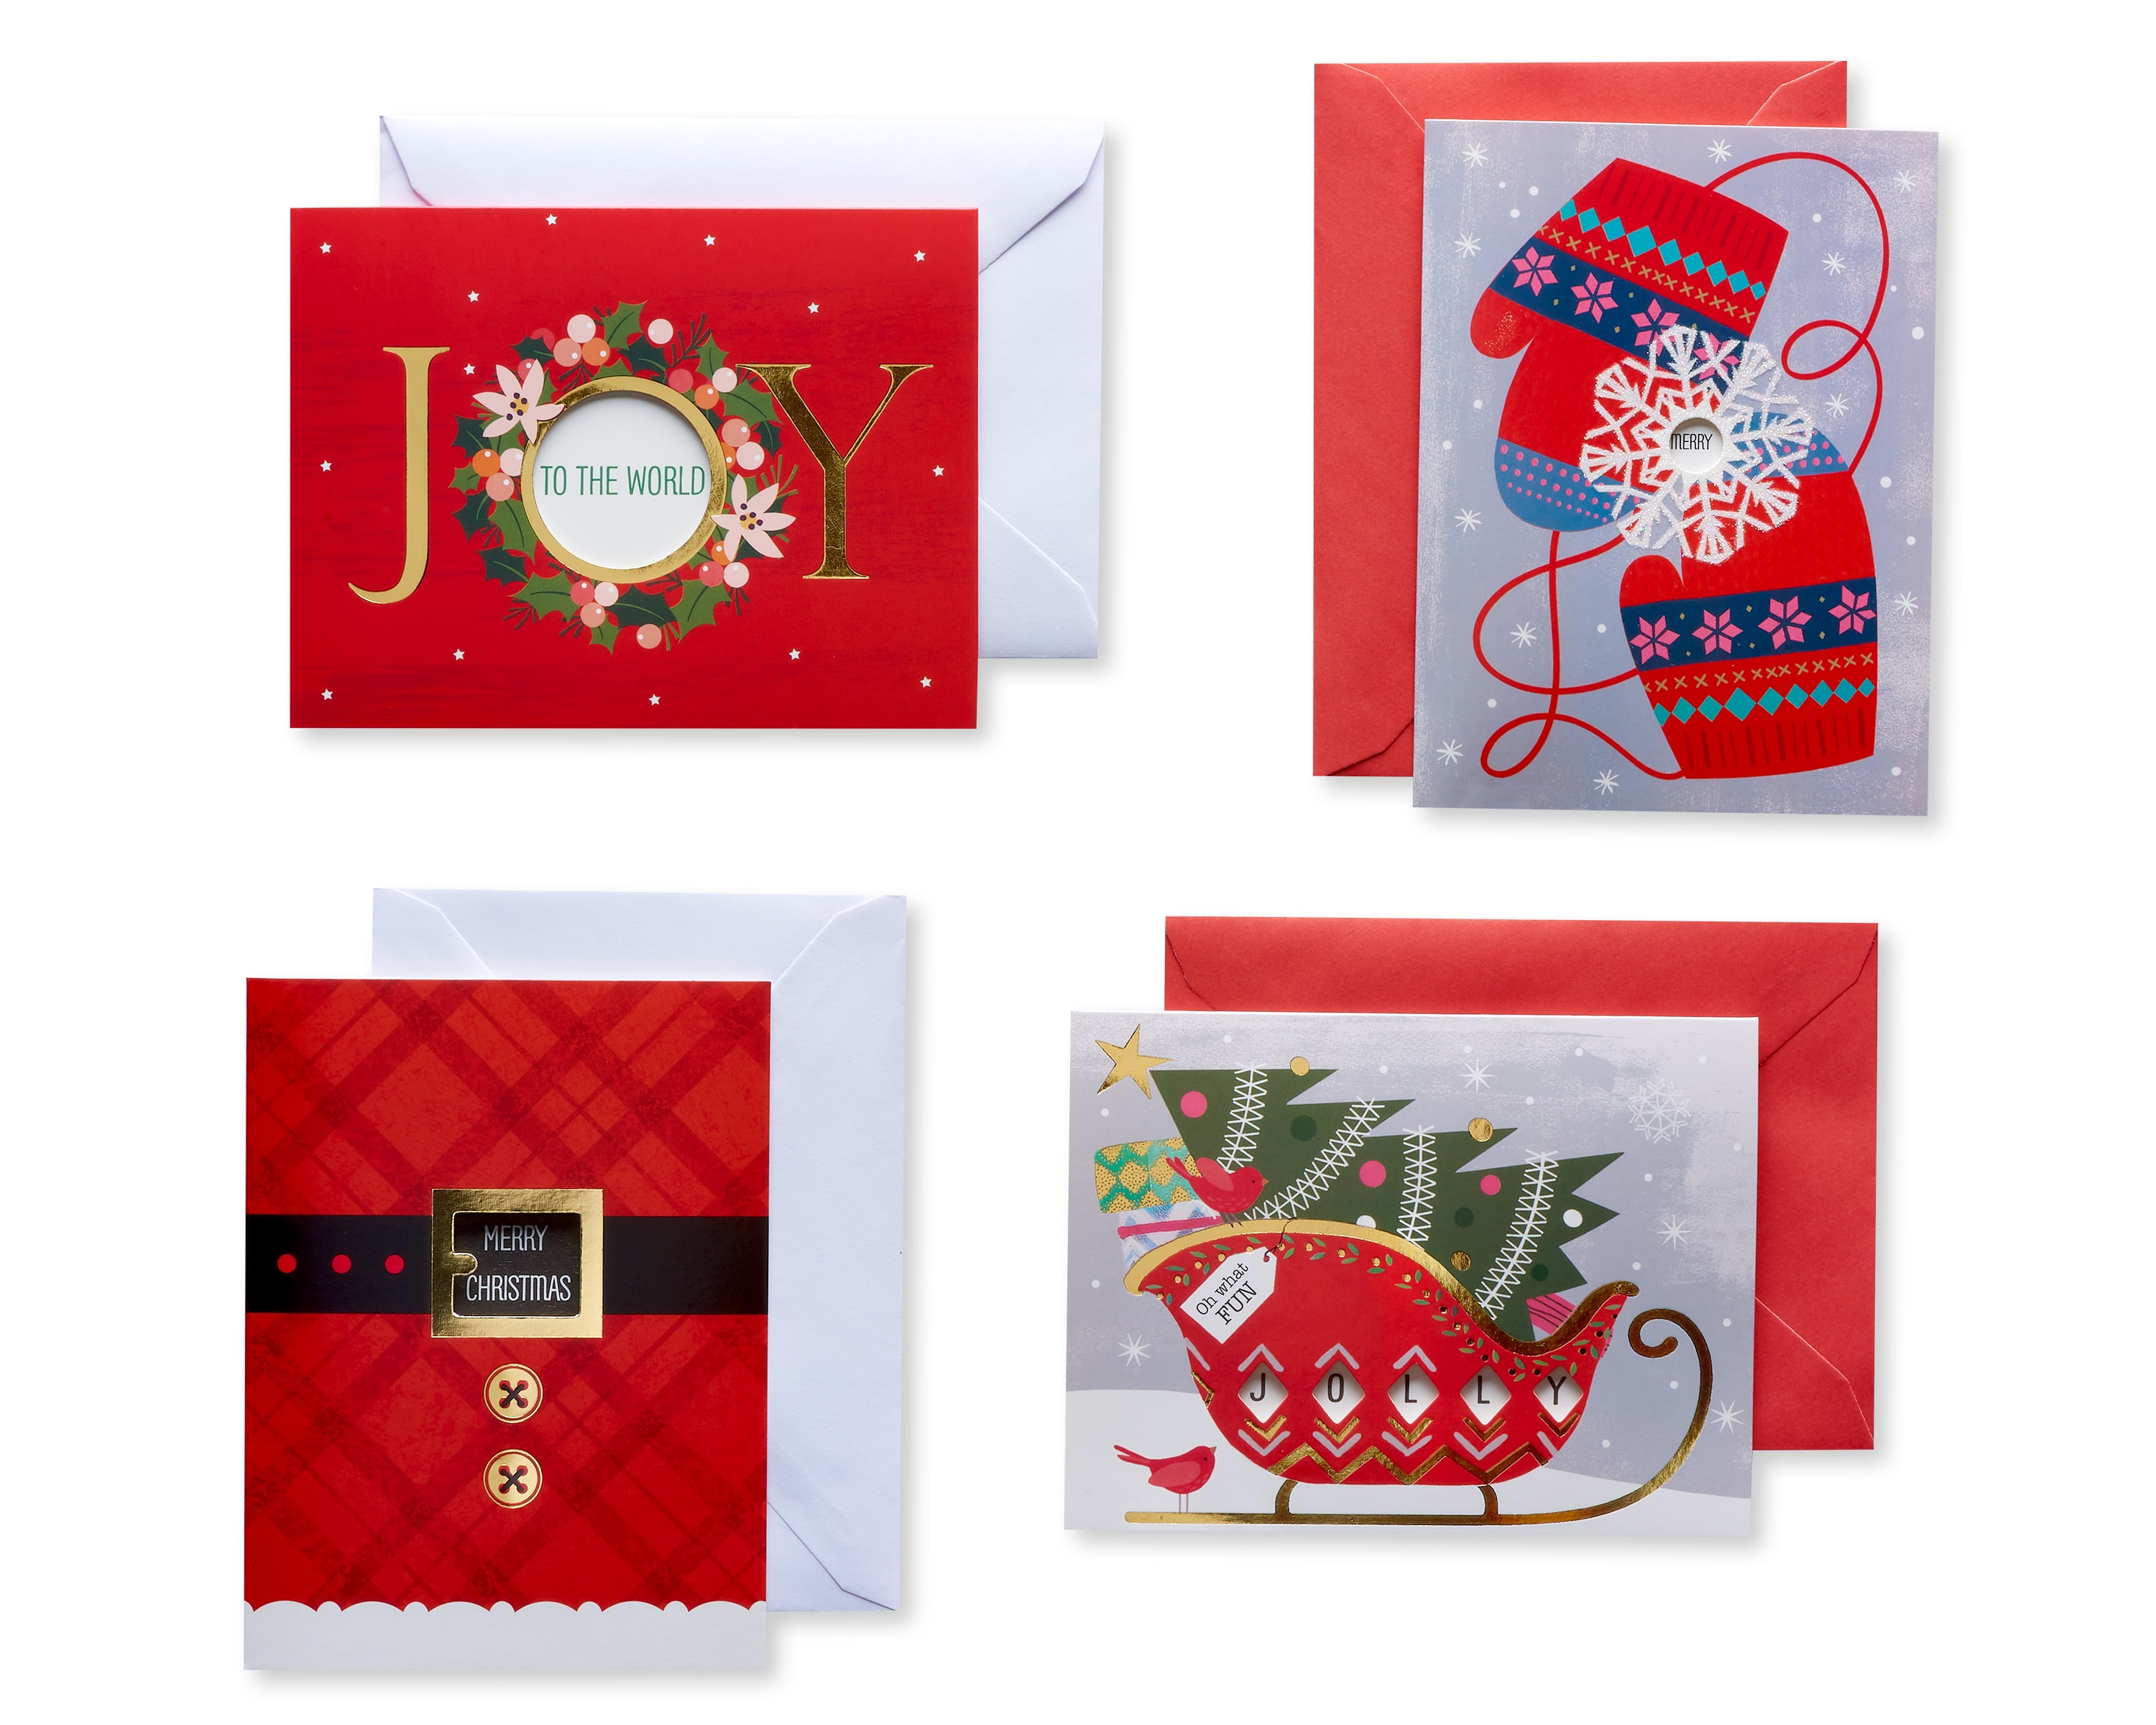 AMERICAN GREETINGS Box Holiday Christmas Cards Foil Lined Envelopes Set of 14 